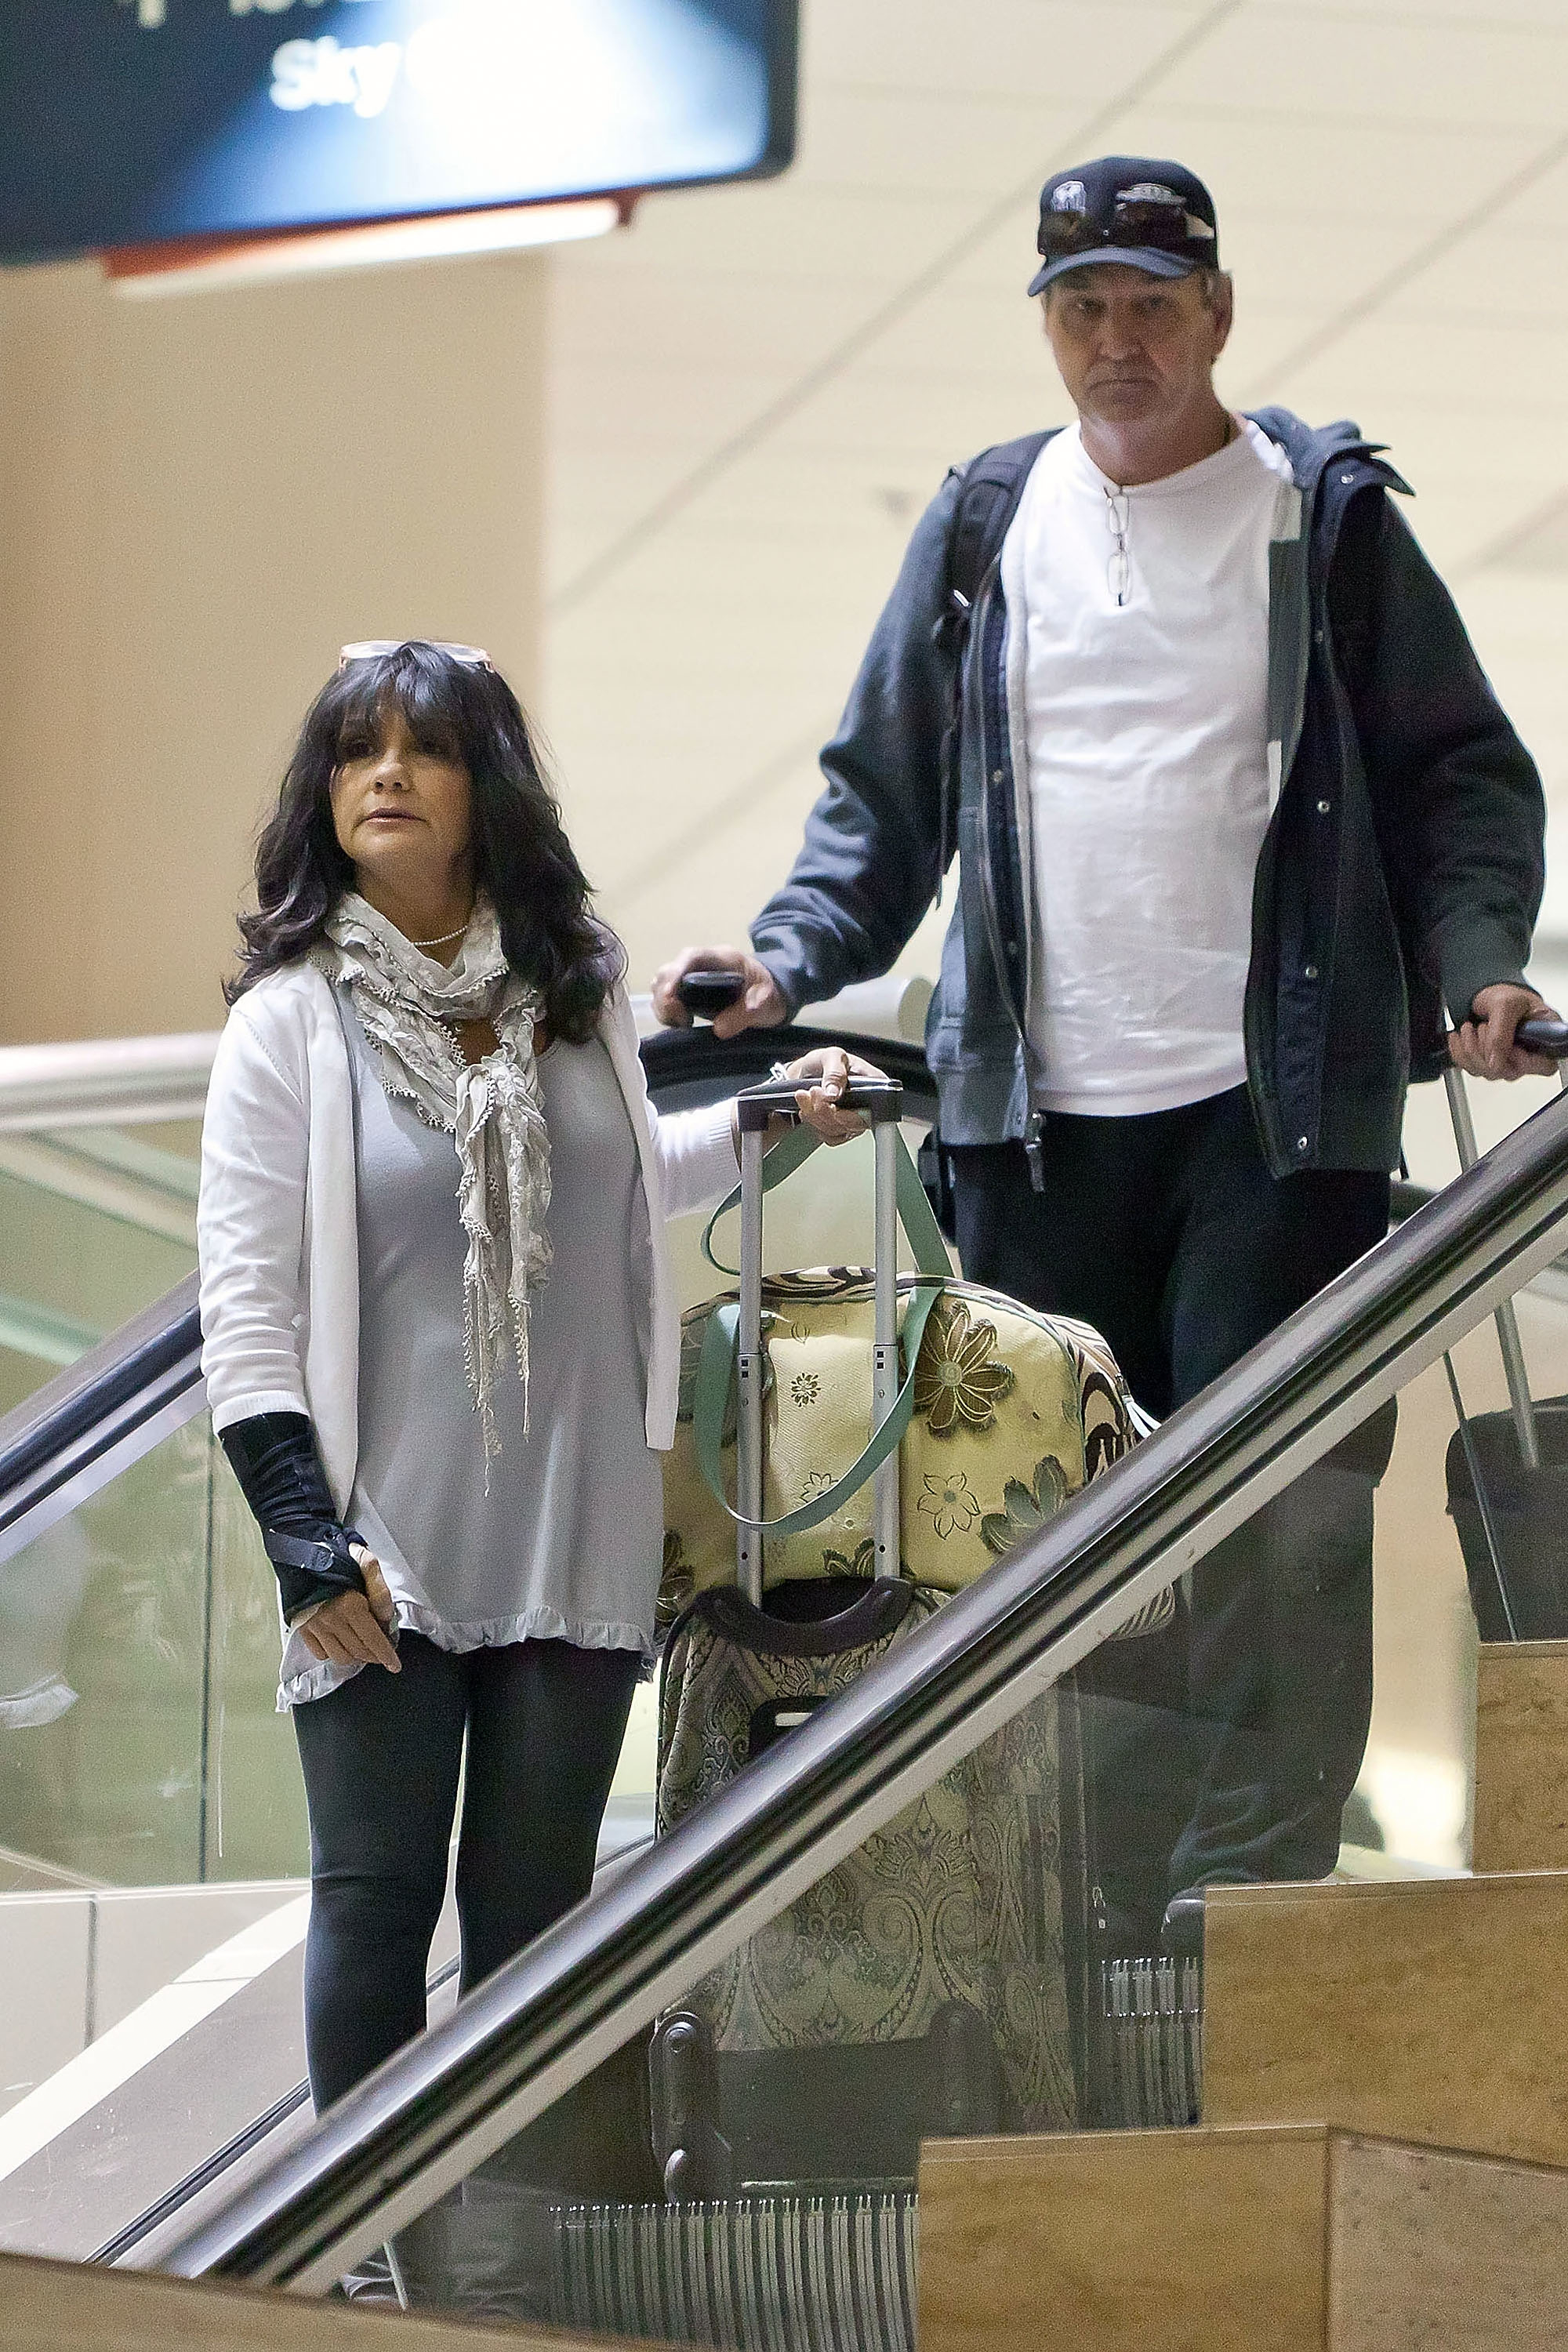 Lynne and Jamie Spears holding luggage and going down an escalator